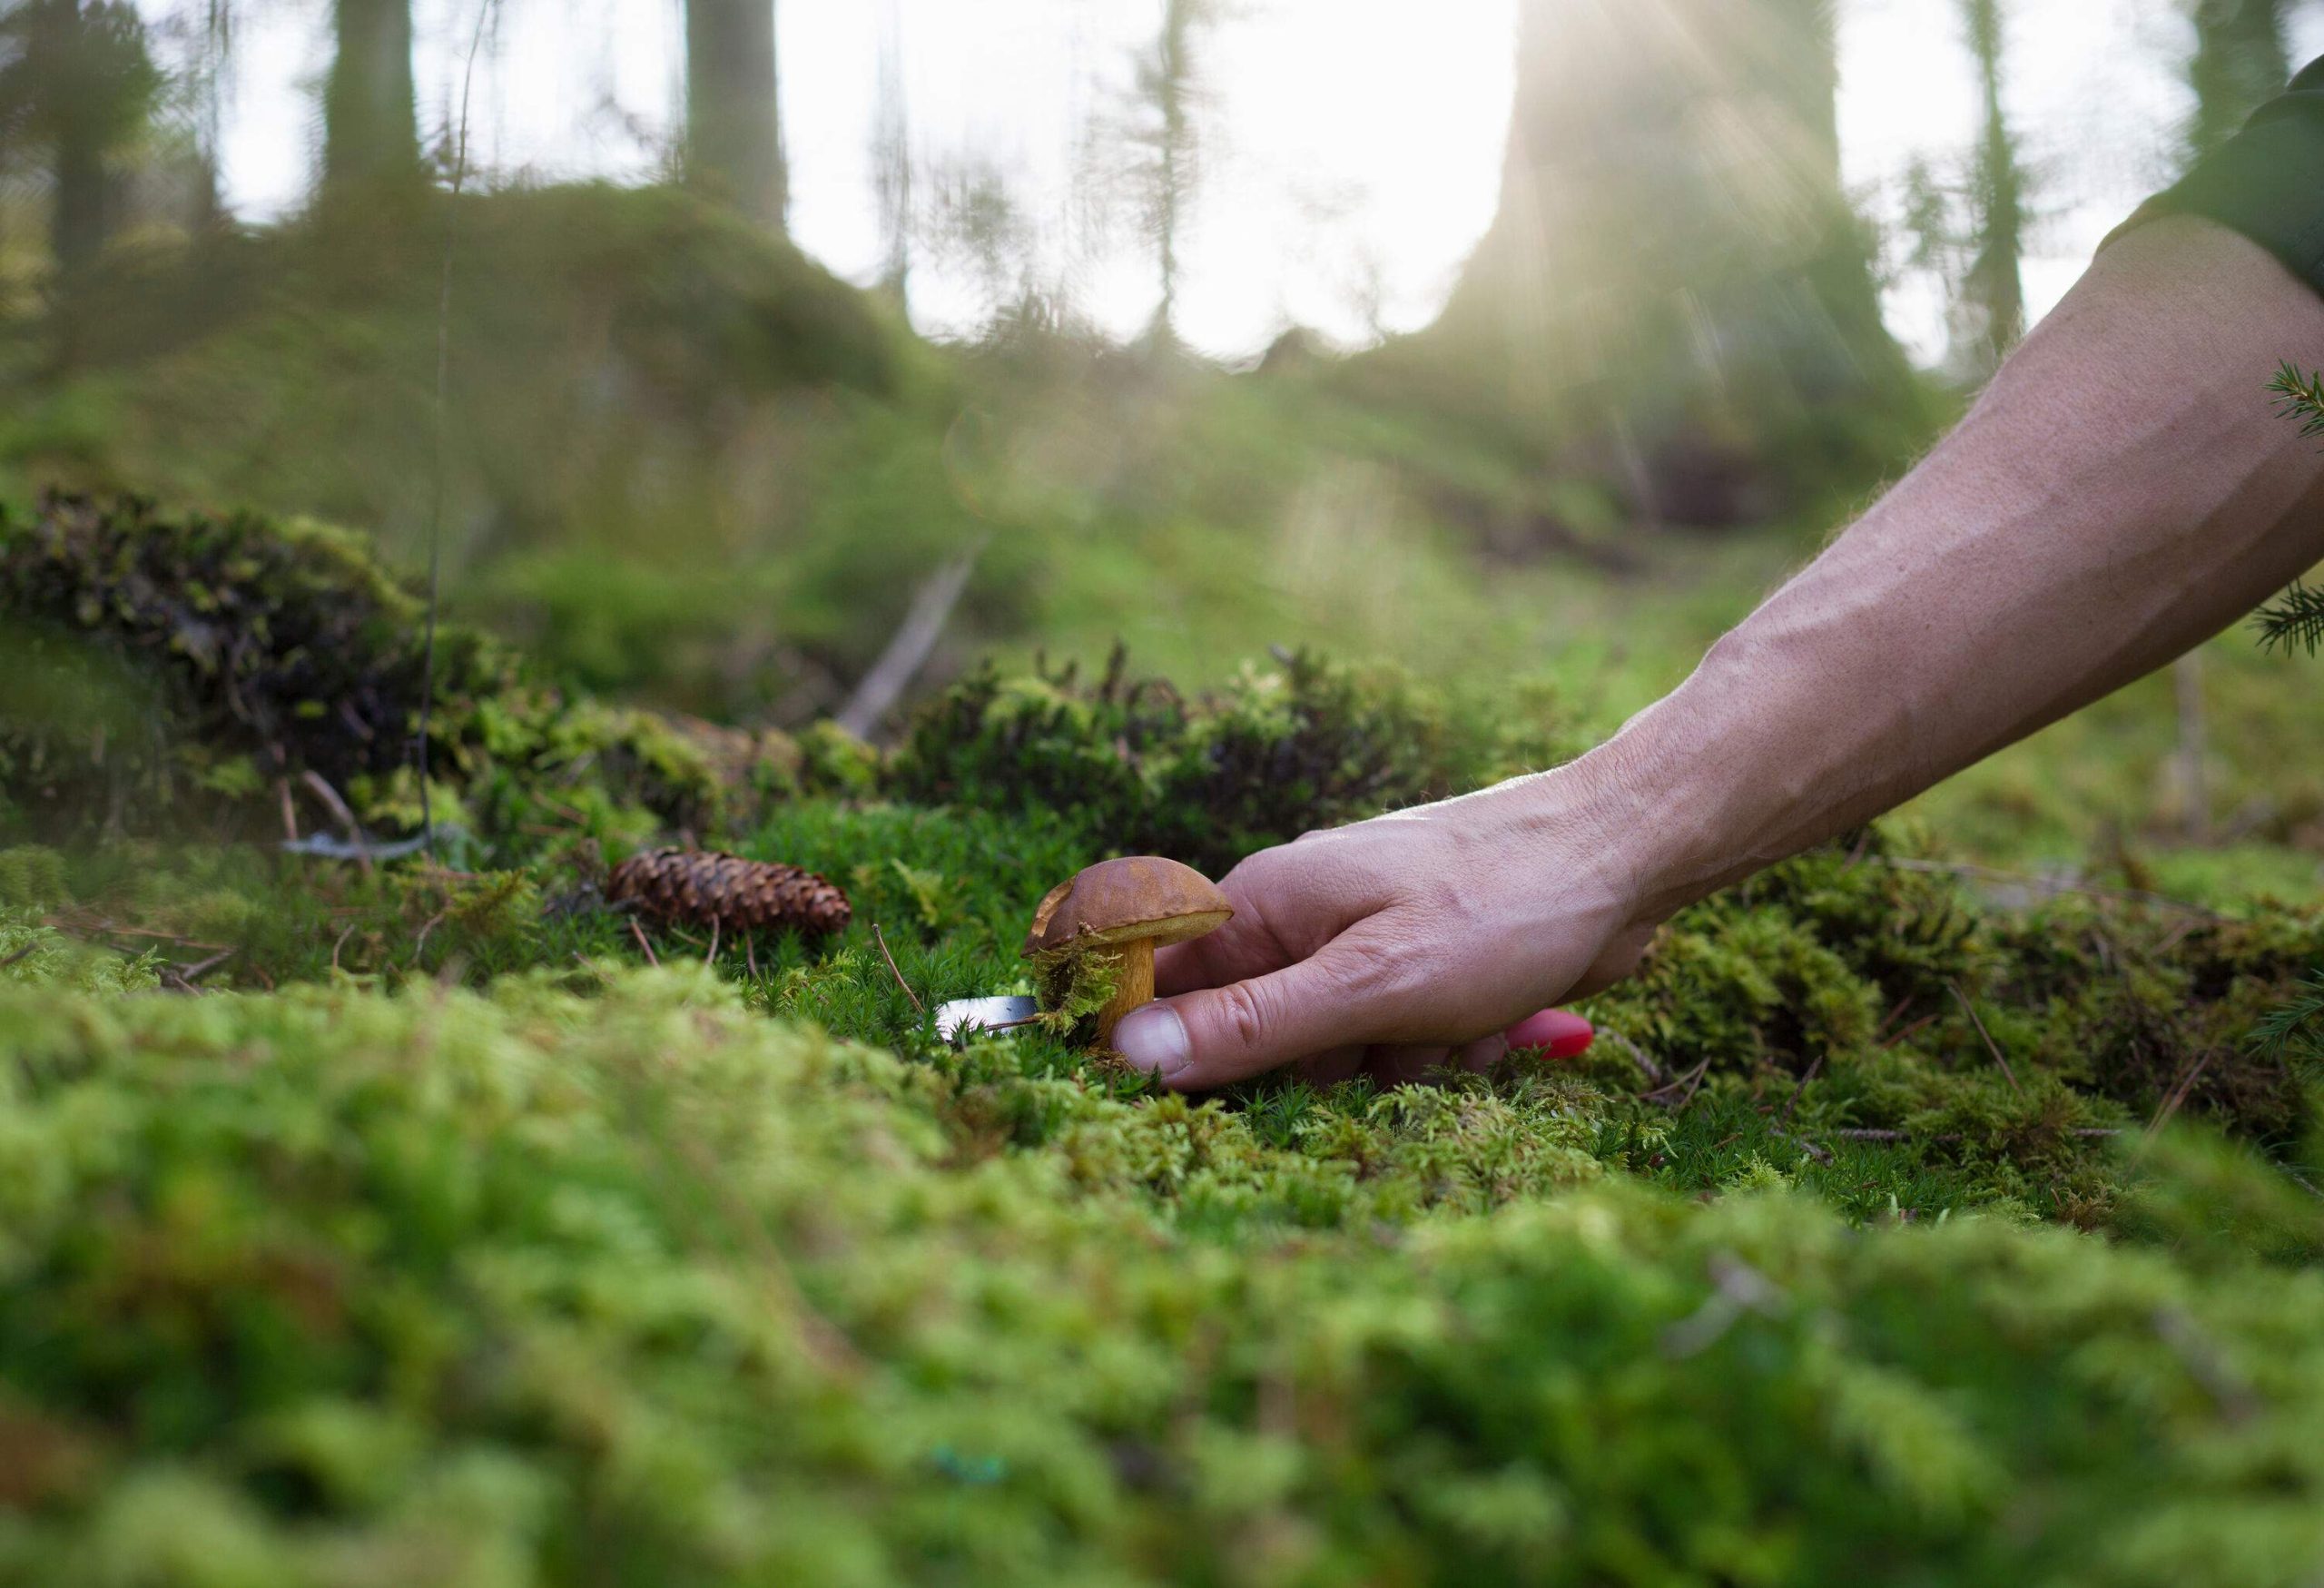 An individual harvesting a mushroom from a mossy forest floor.